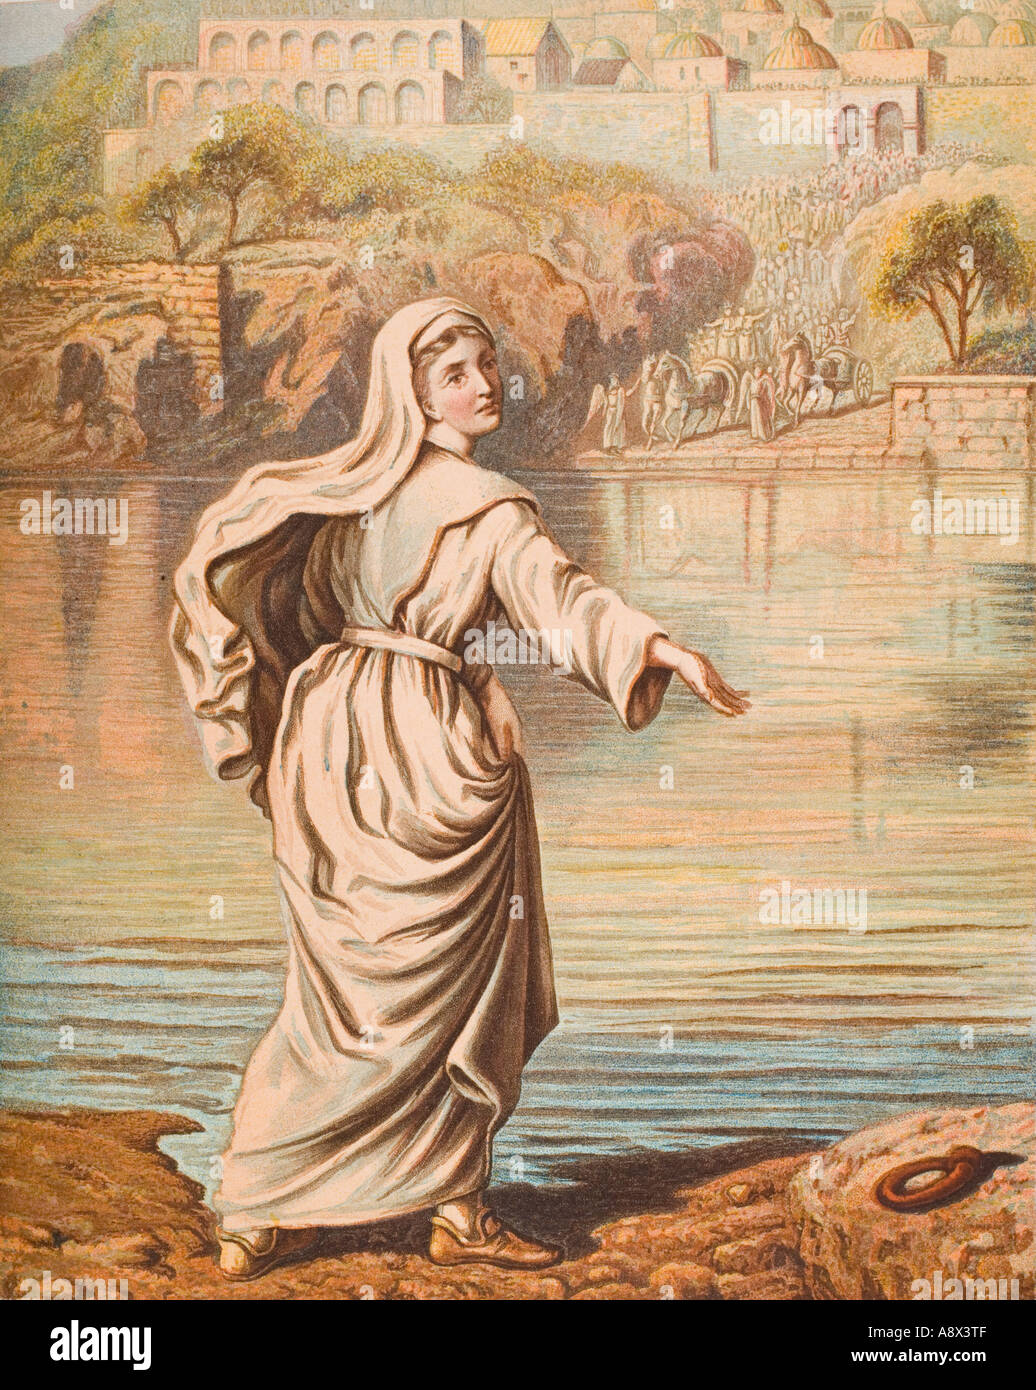 Christiana entering the river. From the book The Pilgrim's Progress by John Bunyan, late 19th century edition. Stock Photo